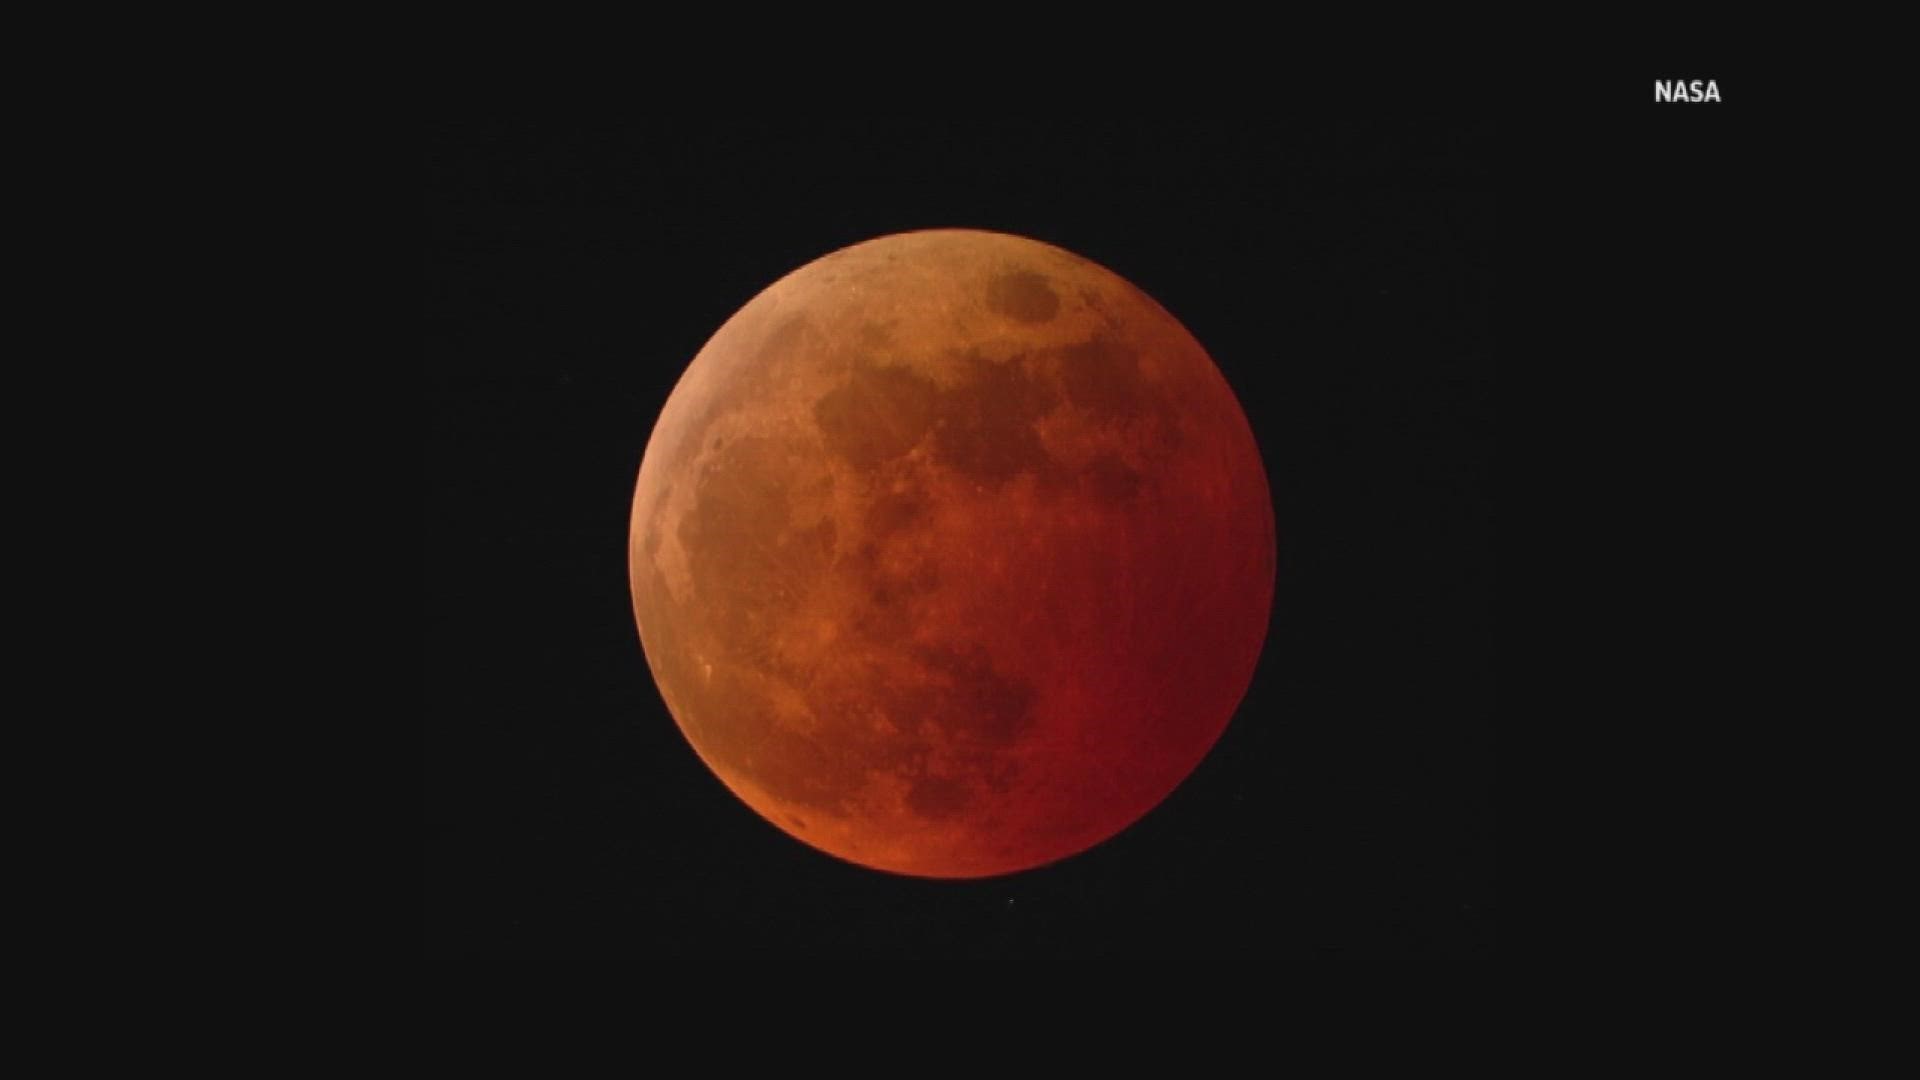 During the eclipse, you'll be able to see what's called the "Super Flower Blood Moon."